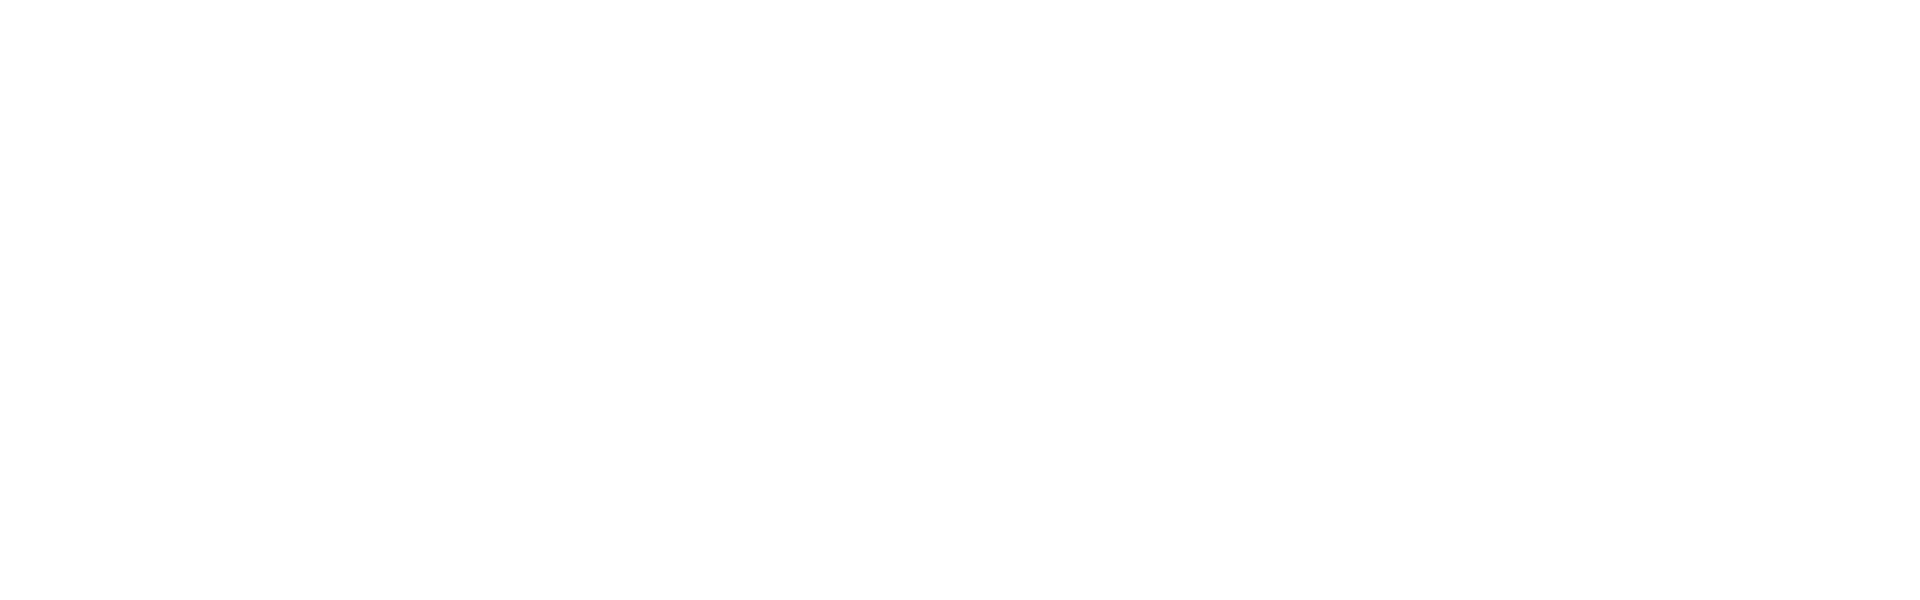 Metabolic Therapy Dictionary